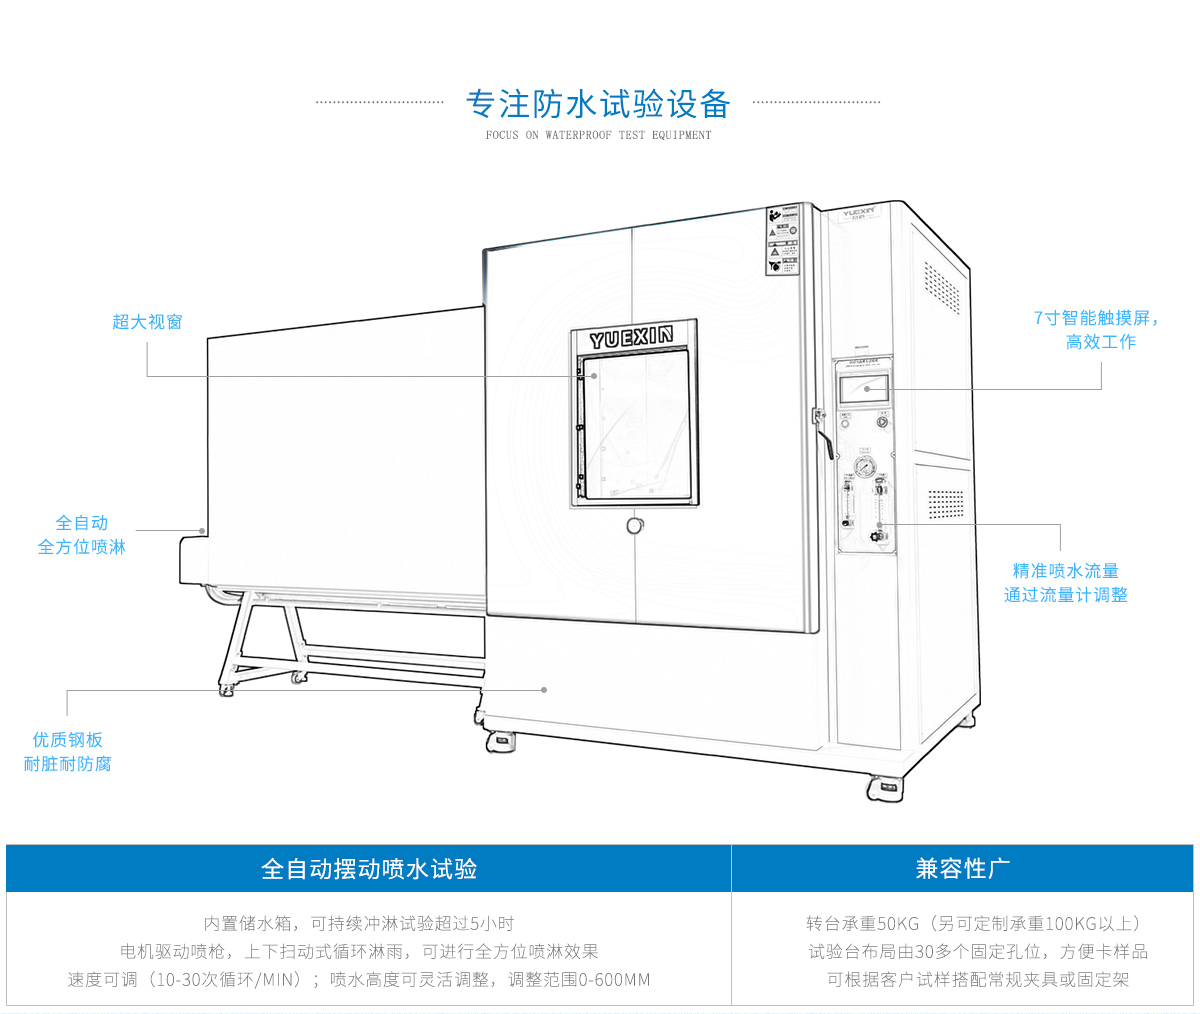 Automatic water spray test chamber